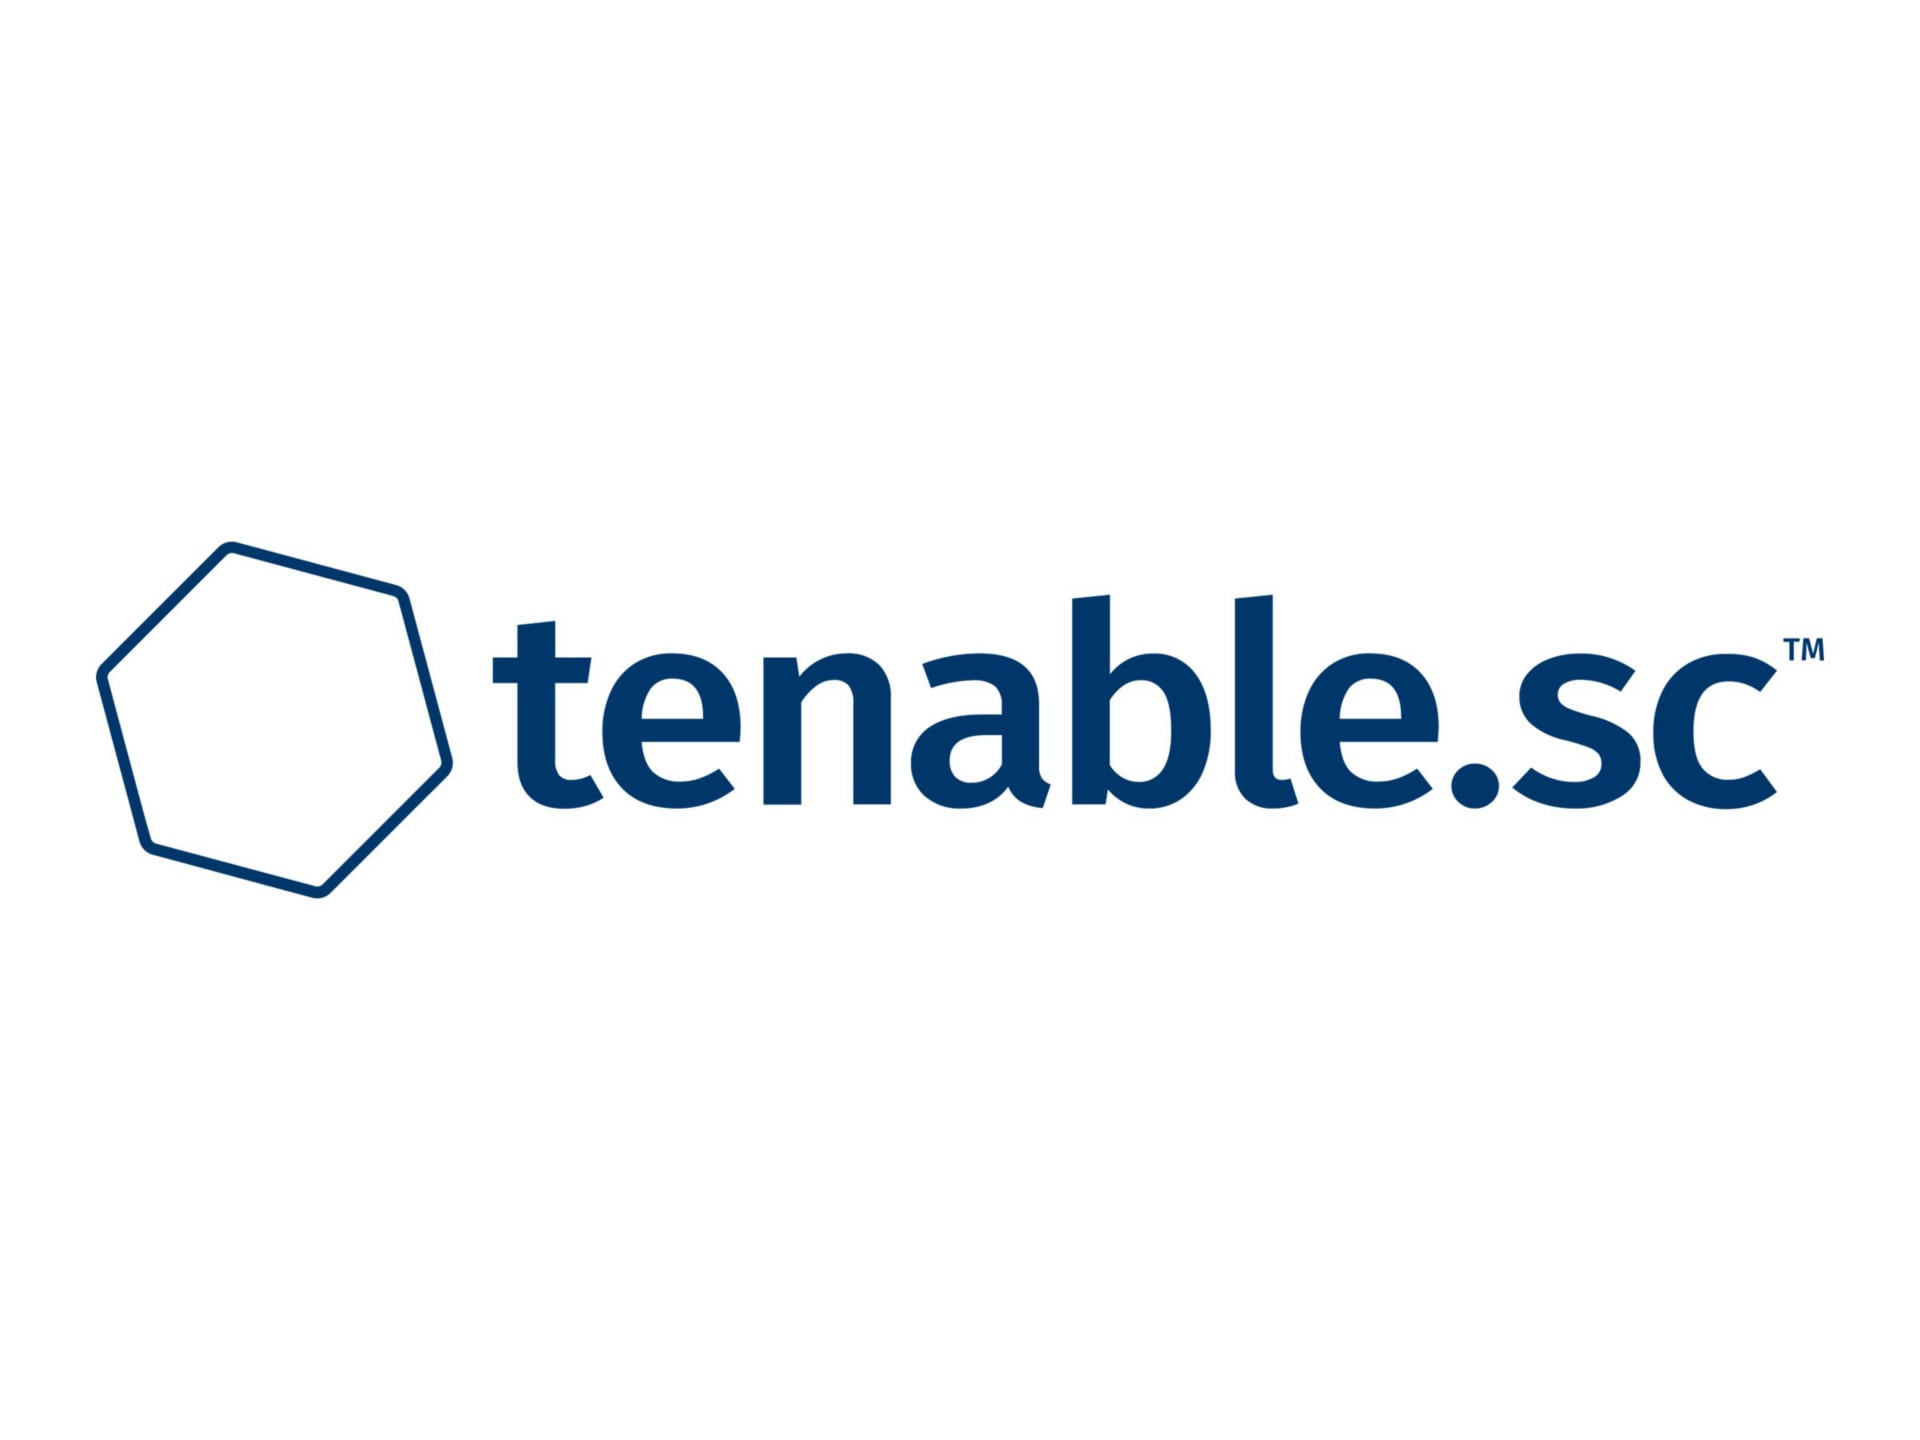 Tenable.sc - subscription license - 1 additional console